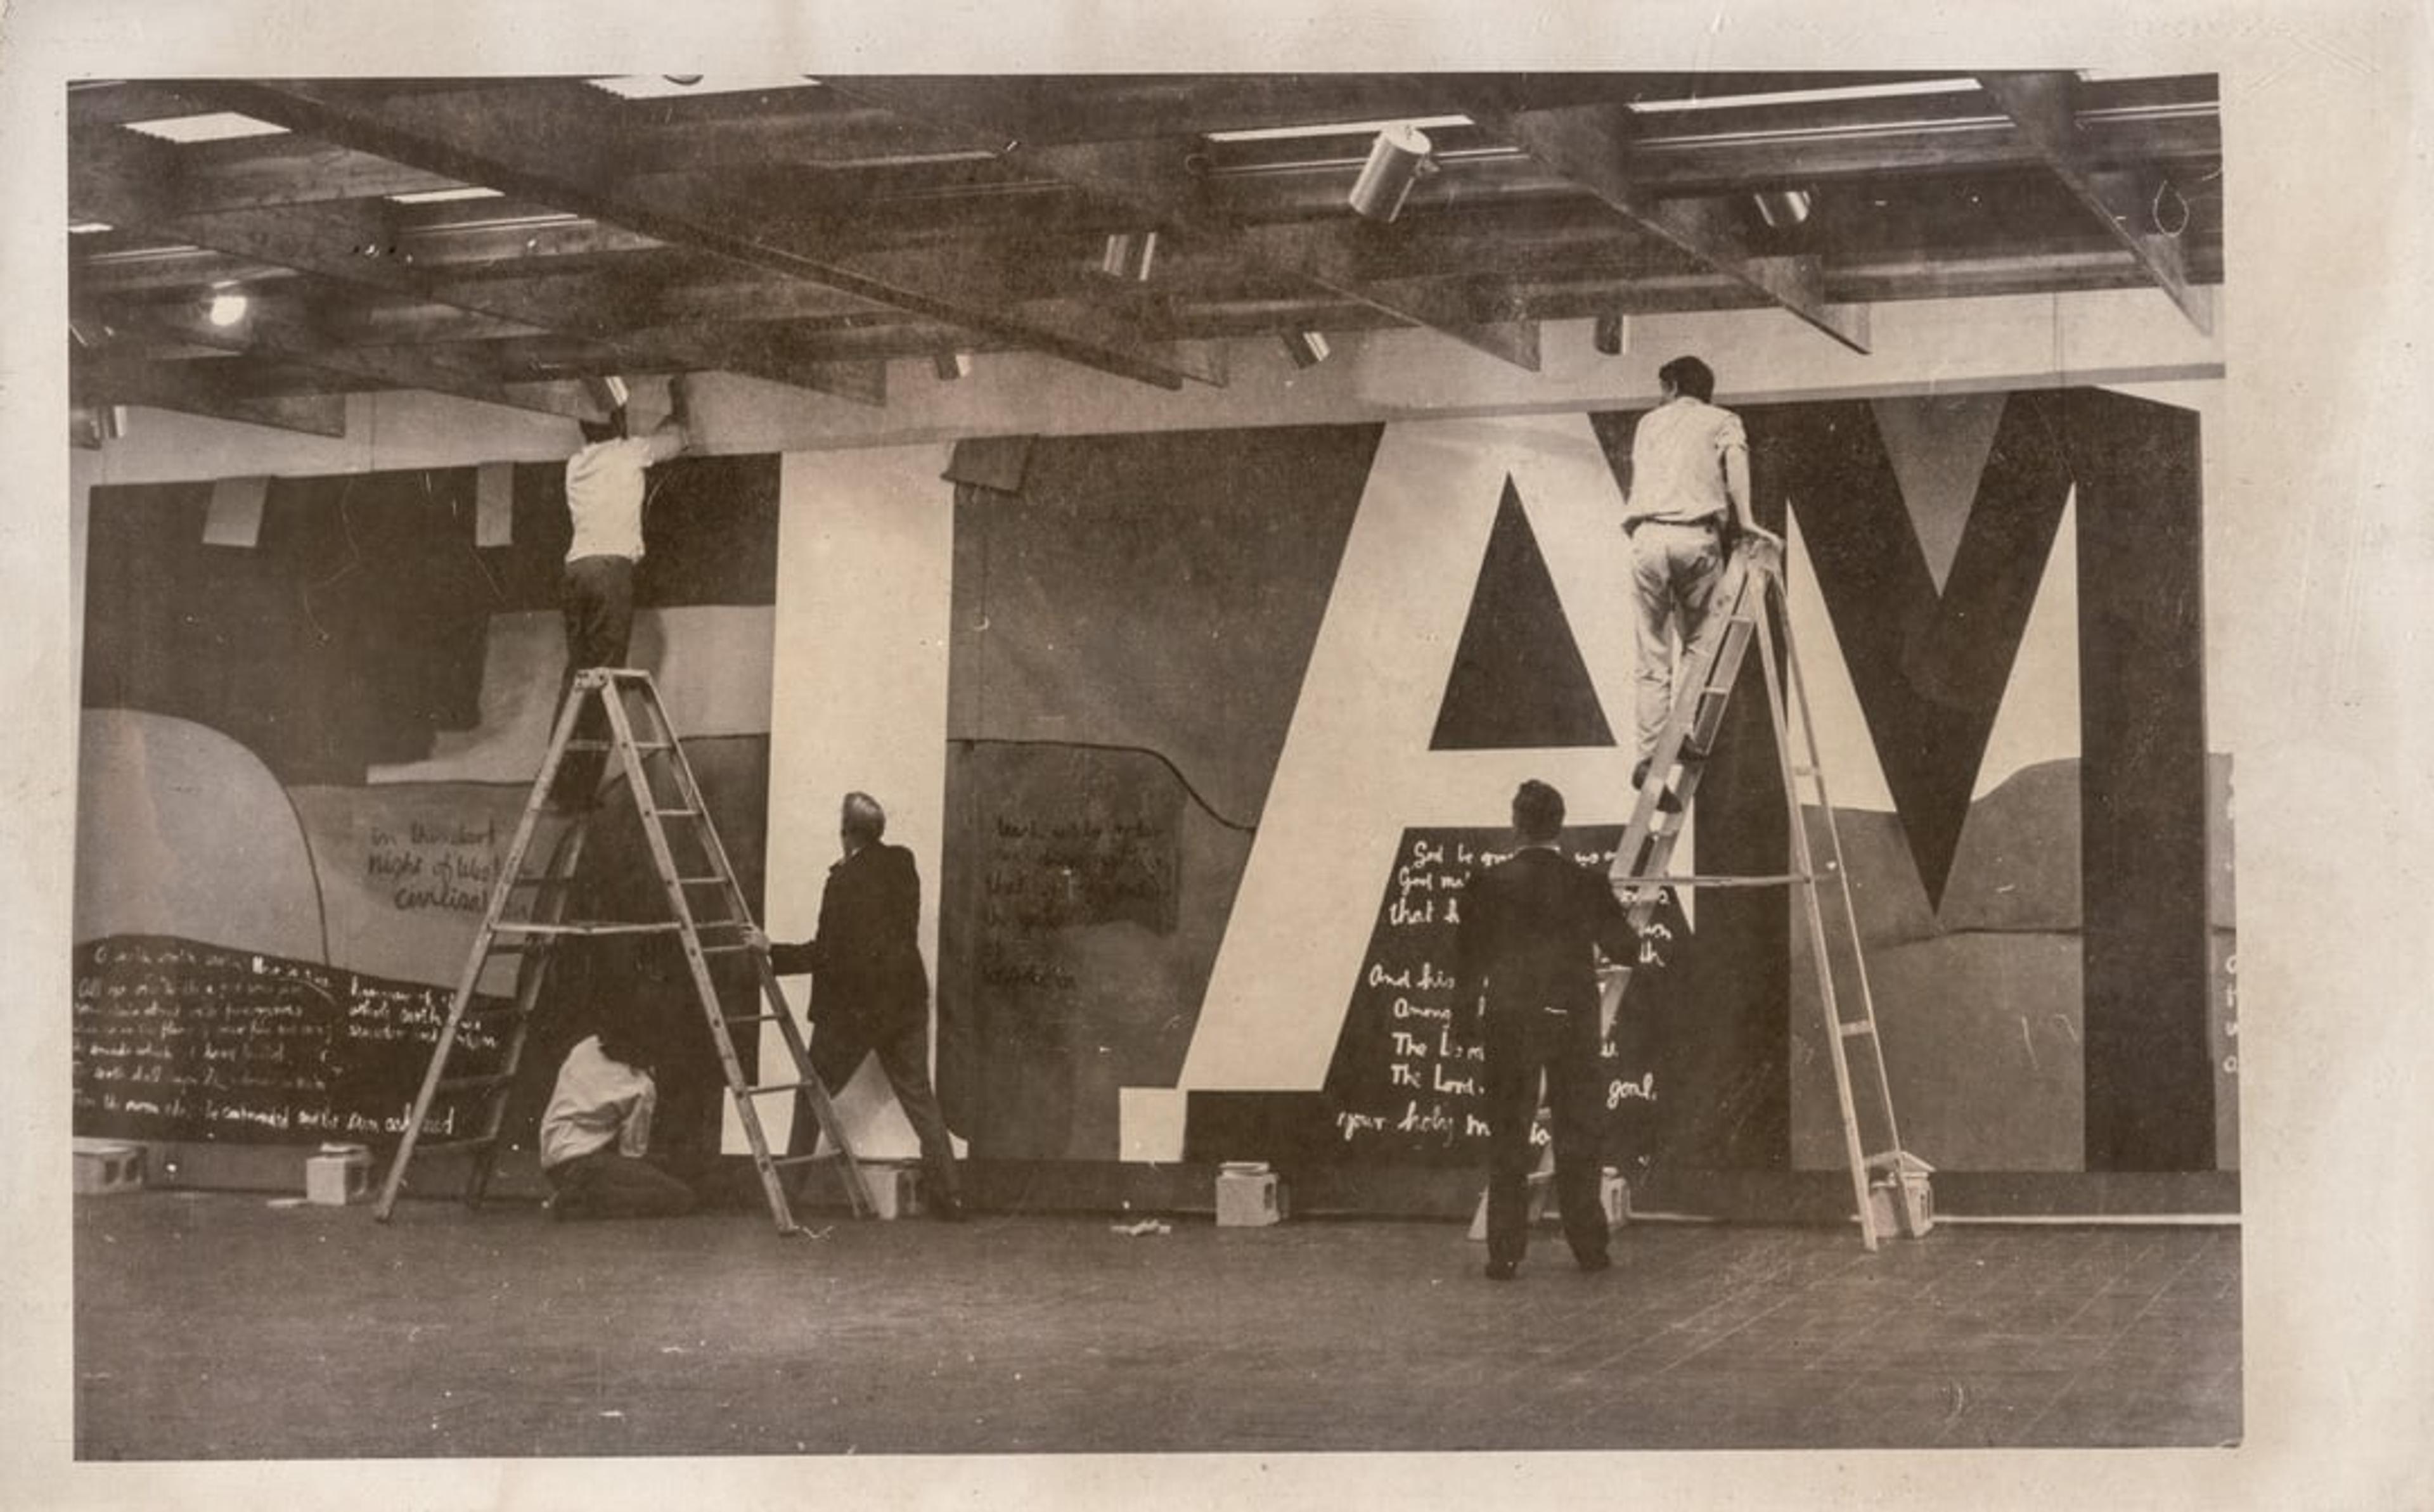 Installation of Gate III by Colin McCahon in 1971 for Ten Big Paintings